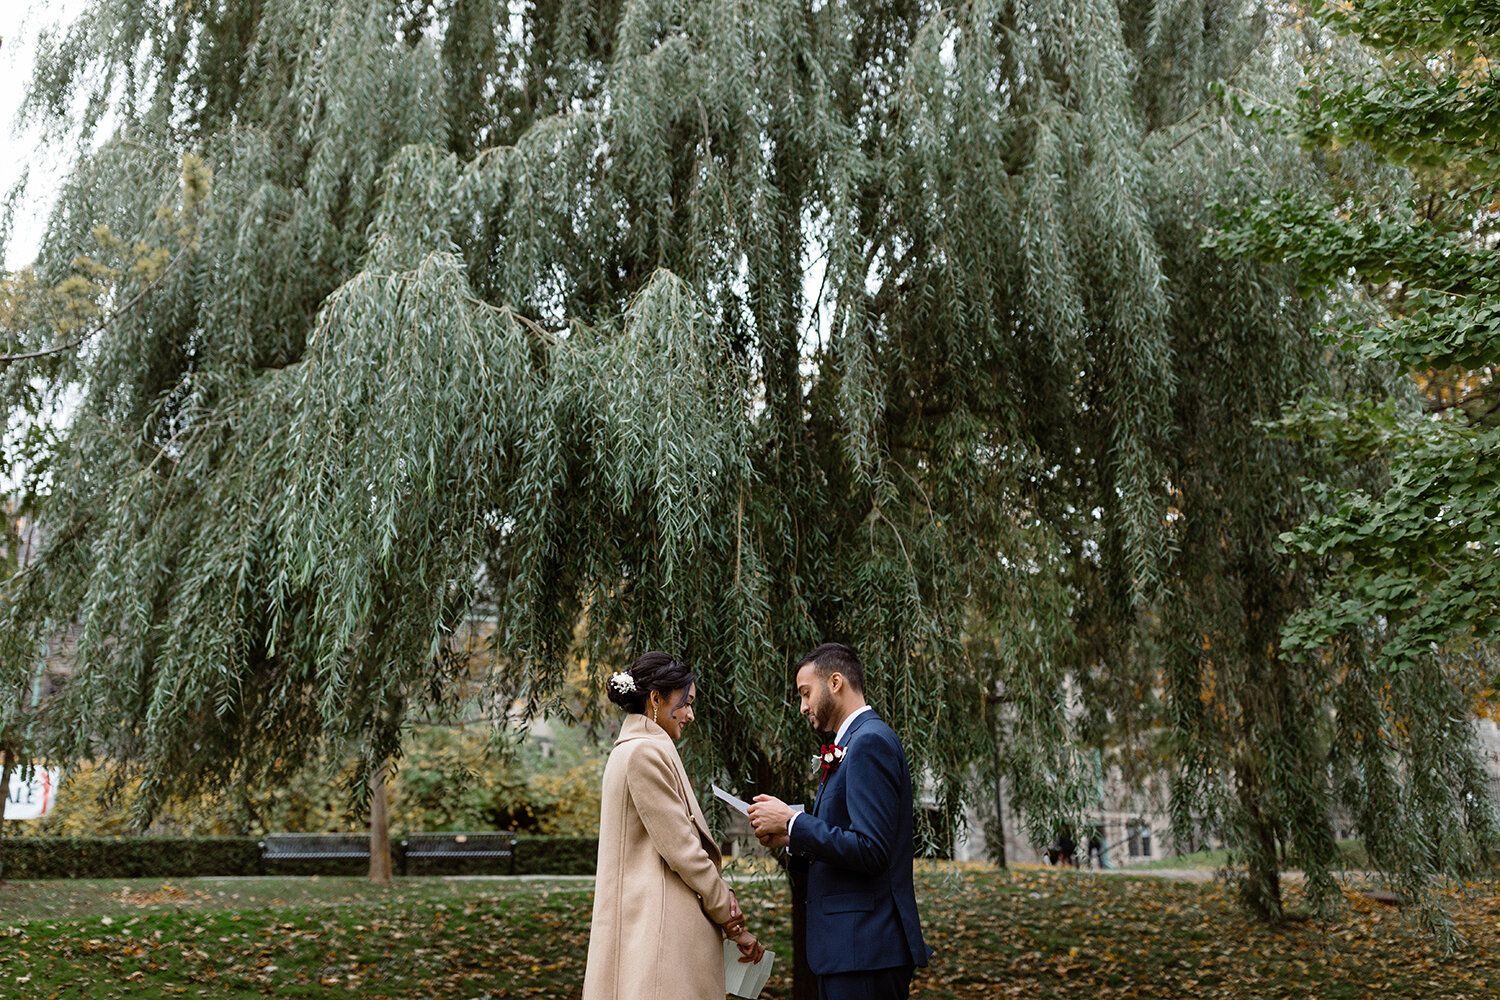 Small-Intimate-Elopement-Downtown-Toronto-U-of-T-Vows-where-to-elope-in-toronto-7.JPG